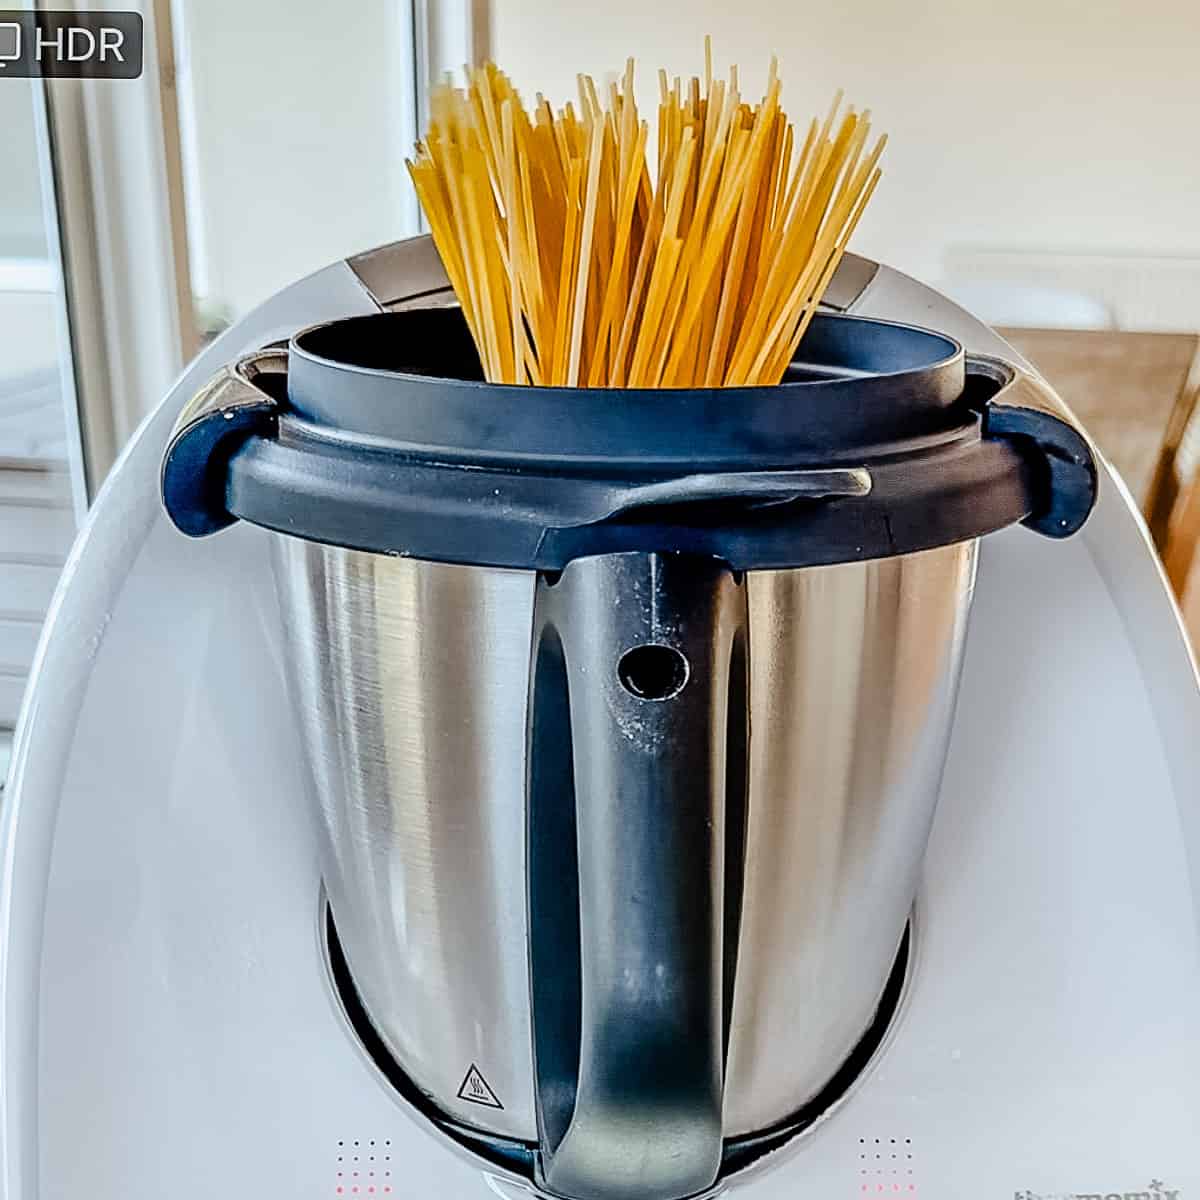 Thermomix with spaghetti in it.